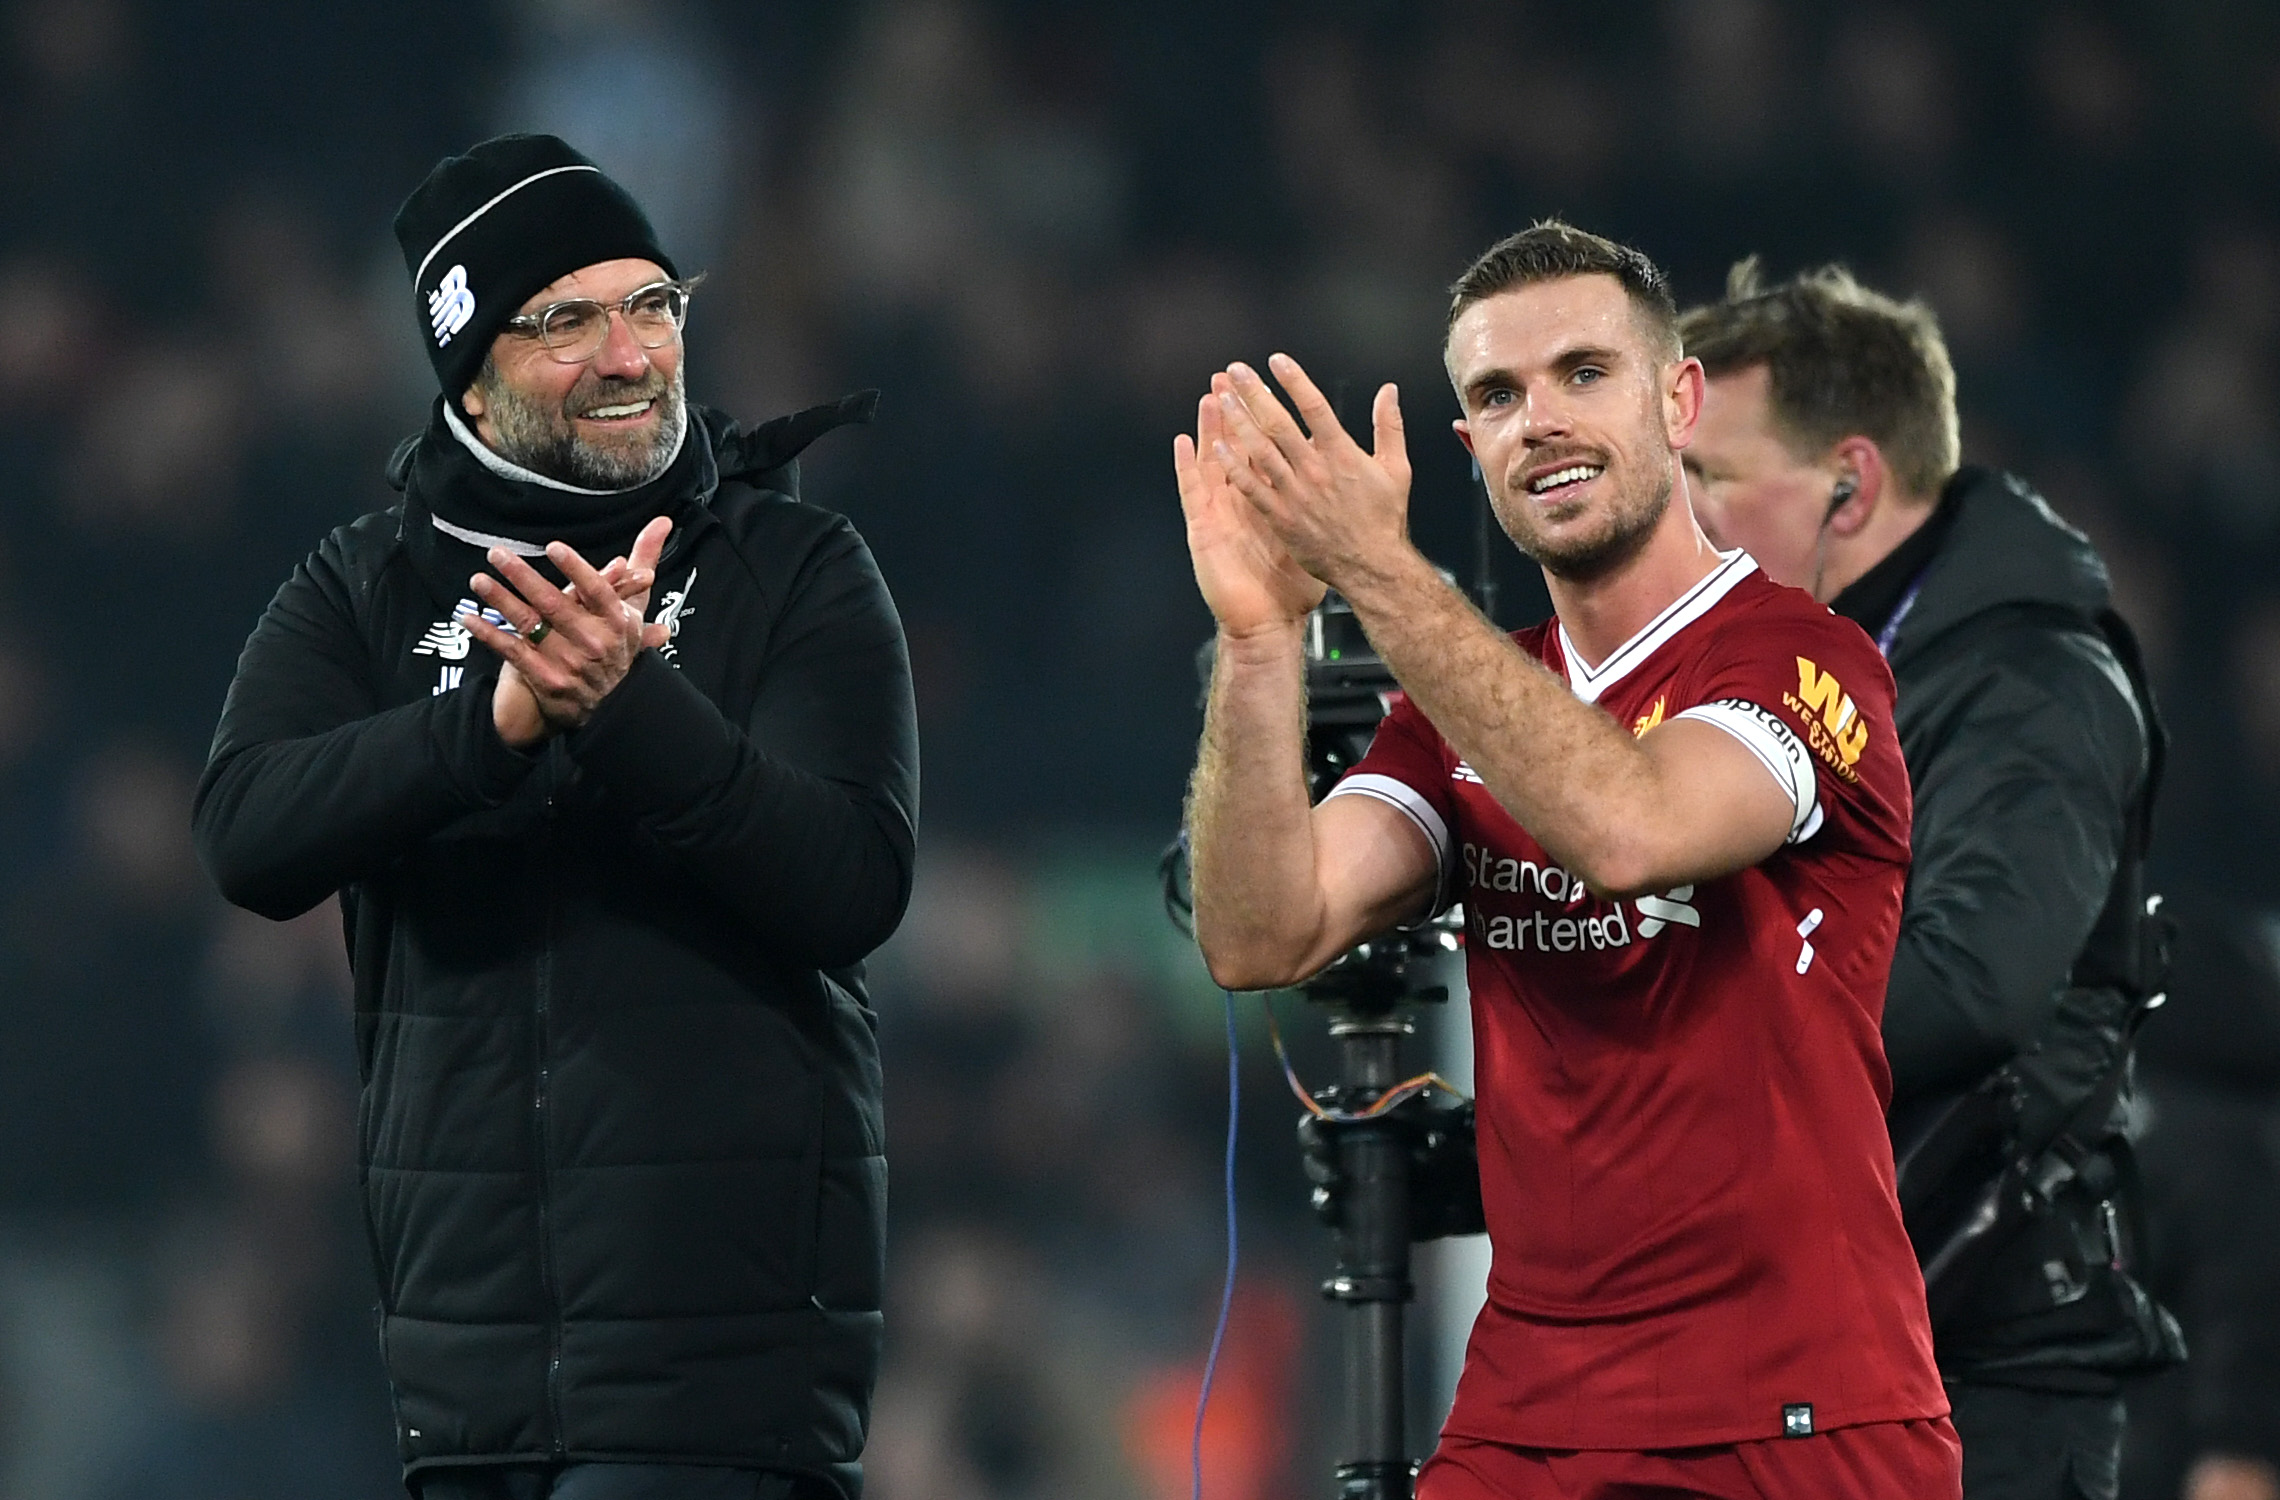 LIVERPOOL, ENGLAND - MARCH 03:  Jordan Henderson of Liverpool celebrates with Jurgen Klopp, Manager of Liverpool following the Premier League match between Liverpool and Newcastle United at Anfield on March 3, 2018 in Liverpool, England.  (Photo by Gareth Copley/Getty Images)